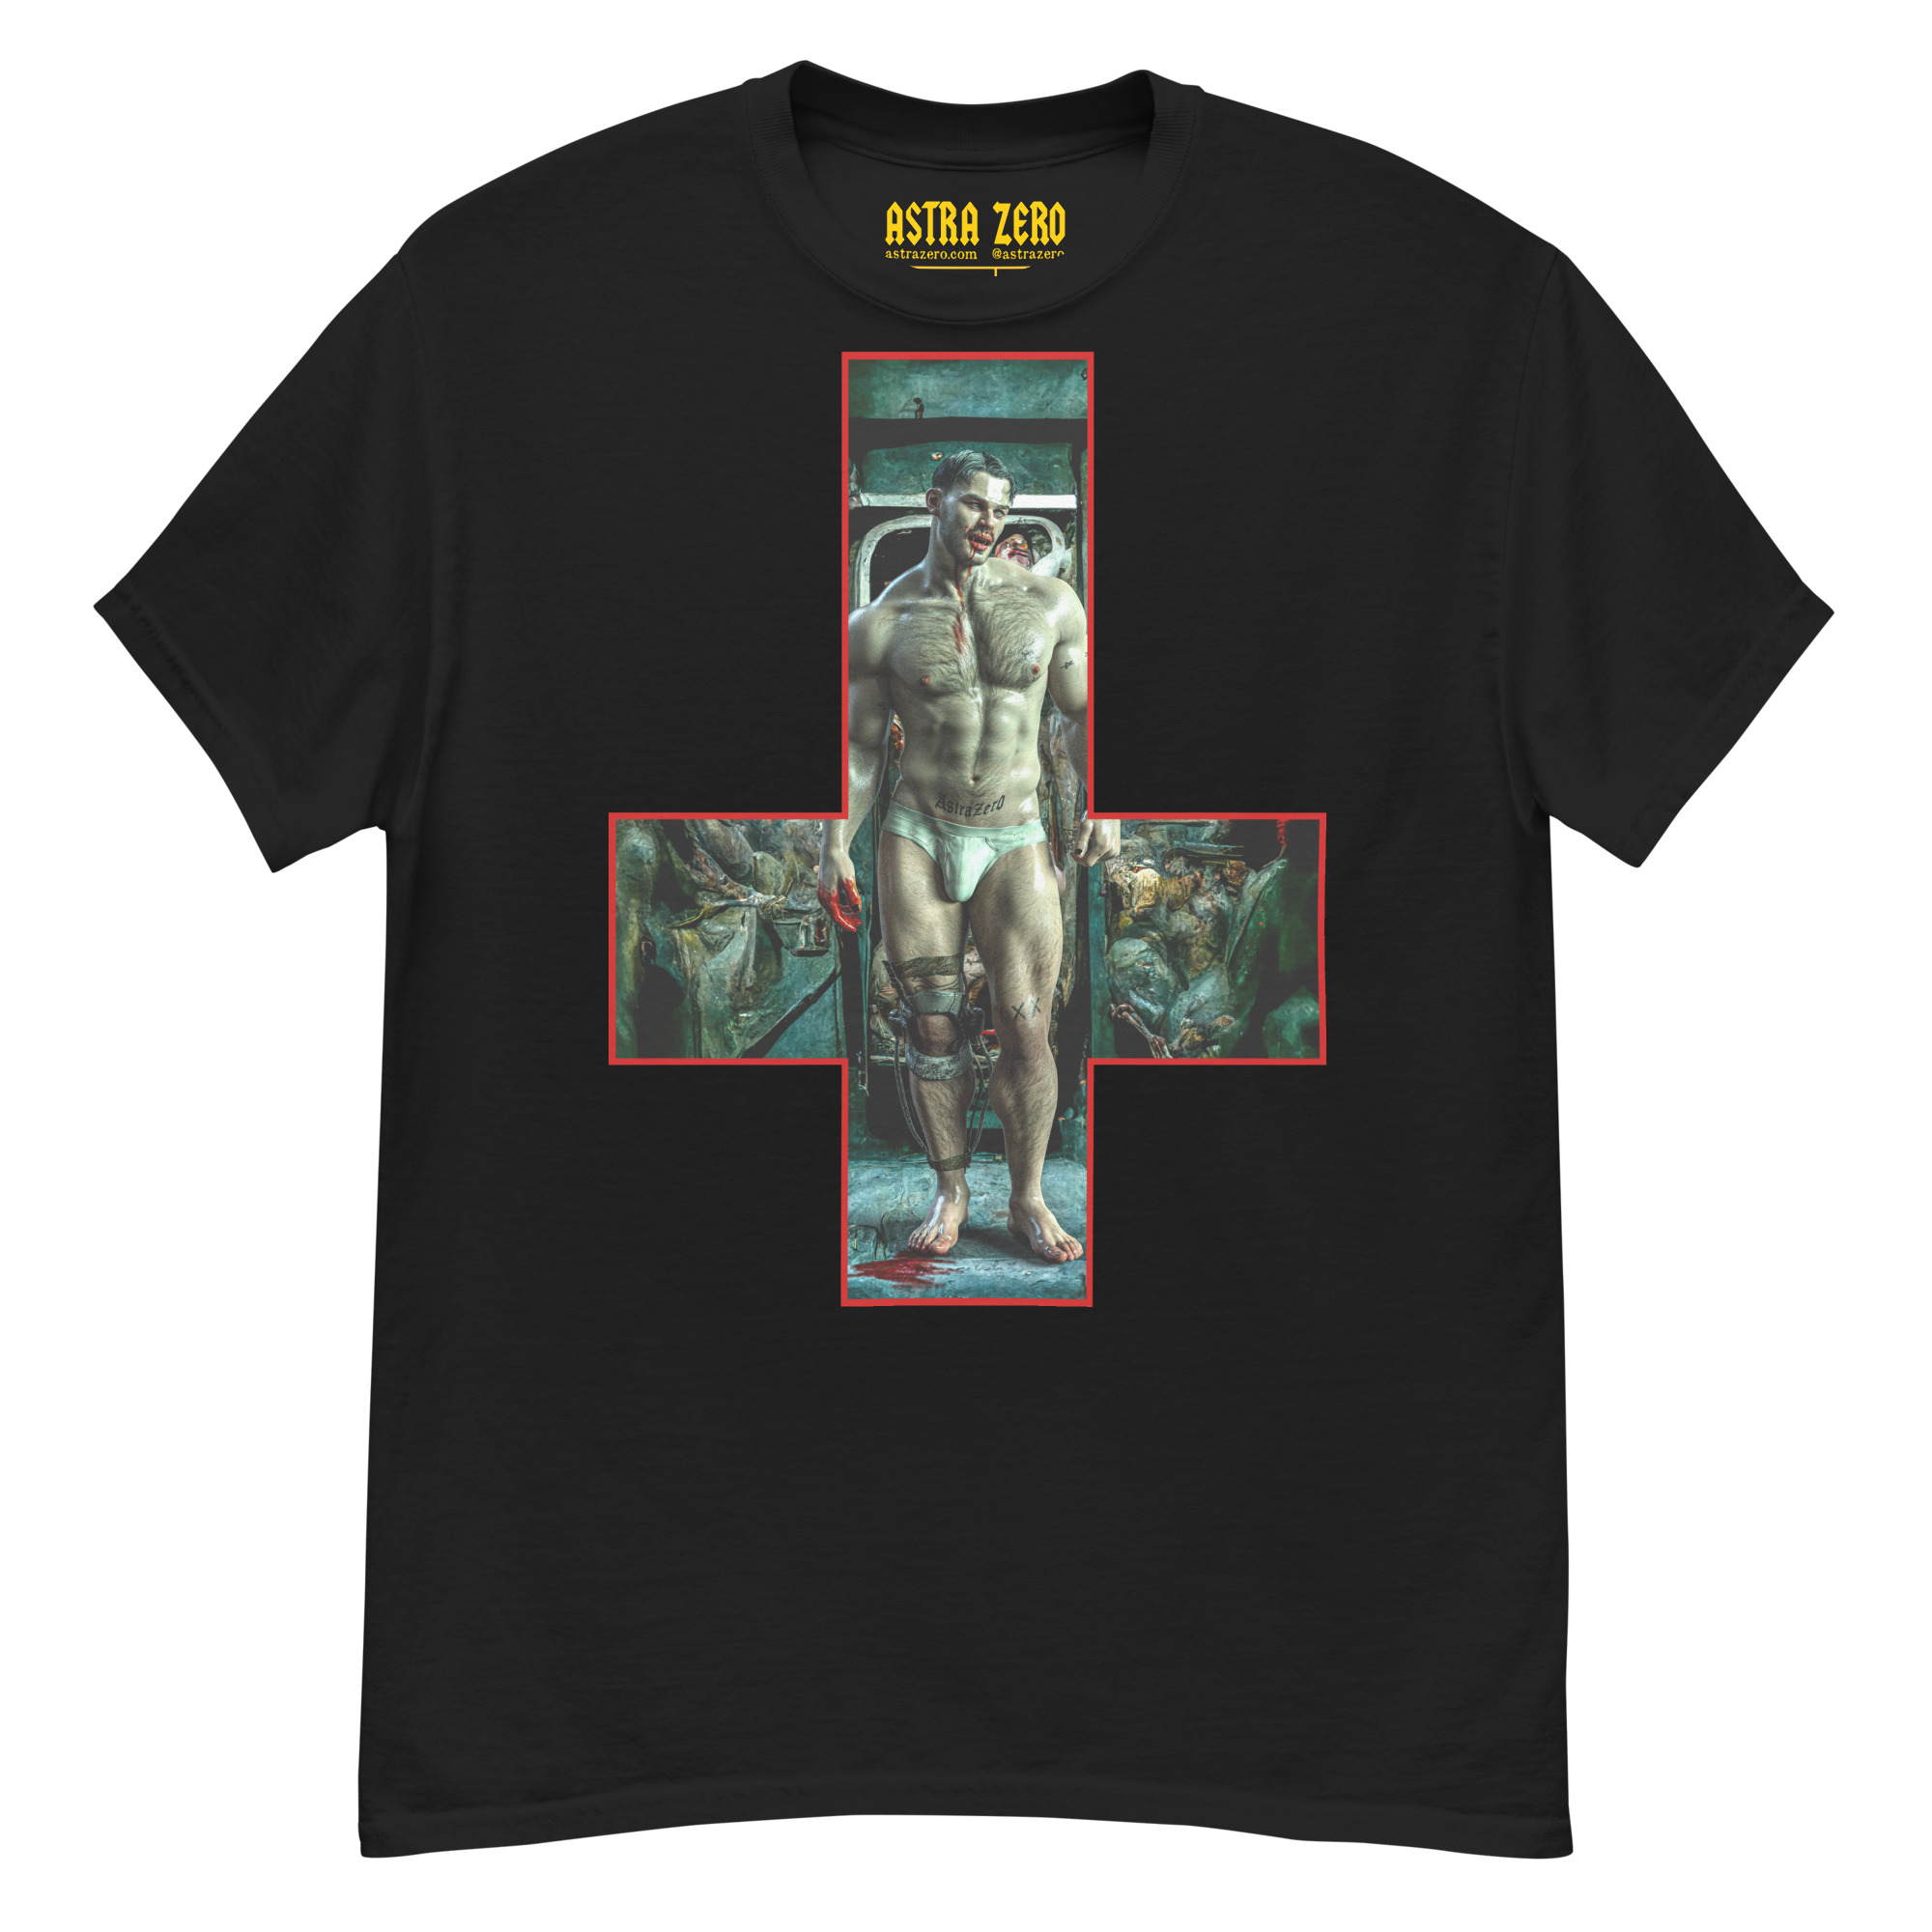 Featured image for “Vampire Cross inverted - Men's classic tee”